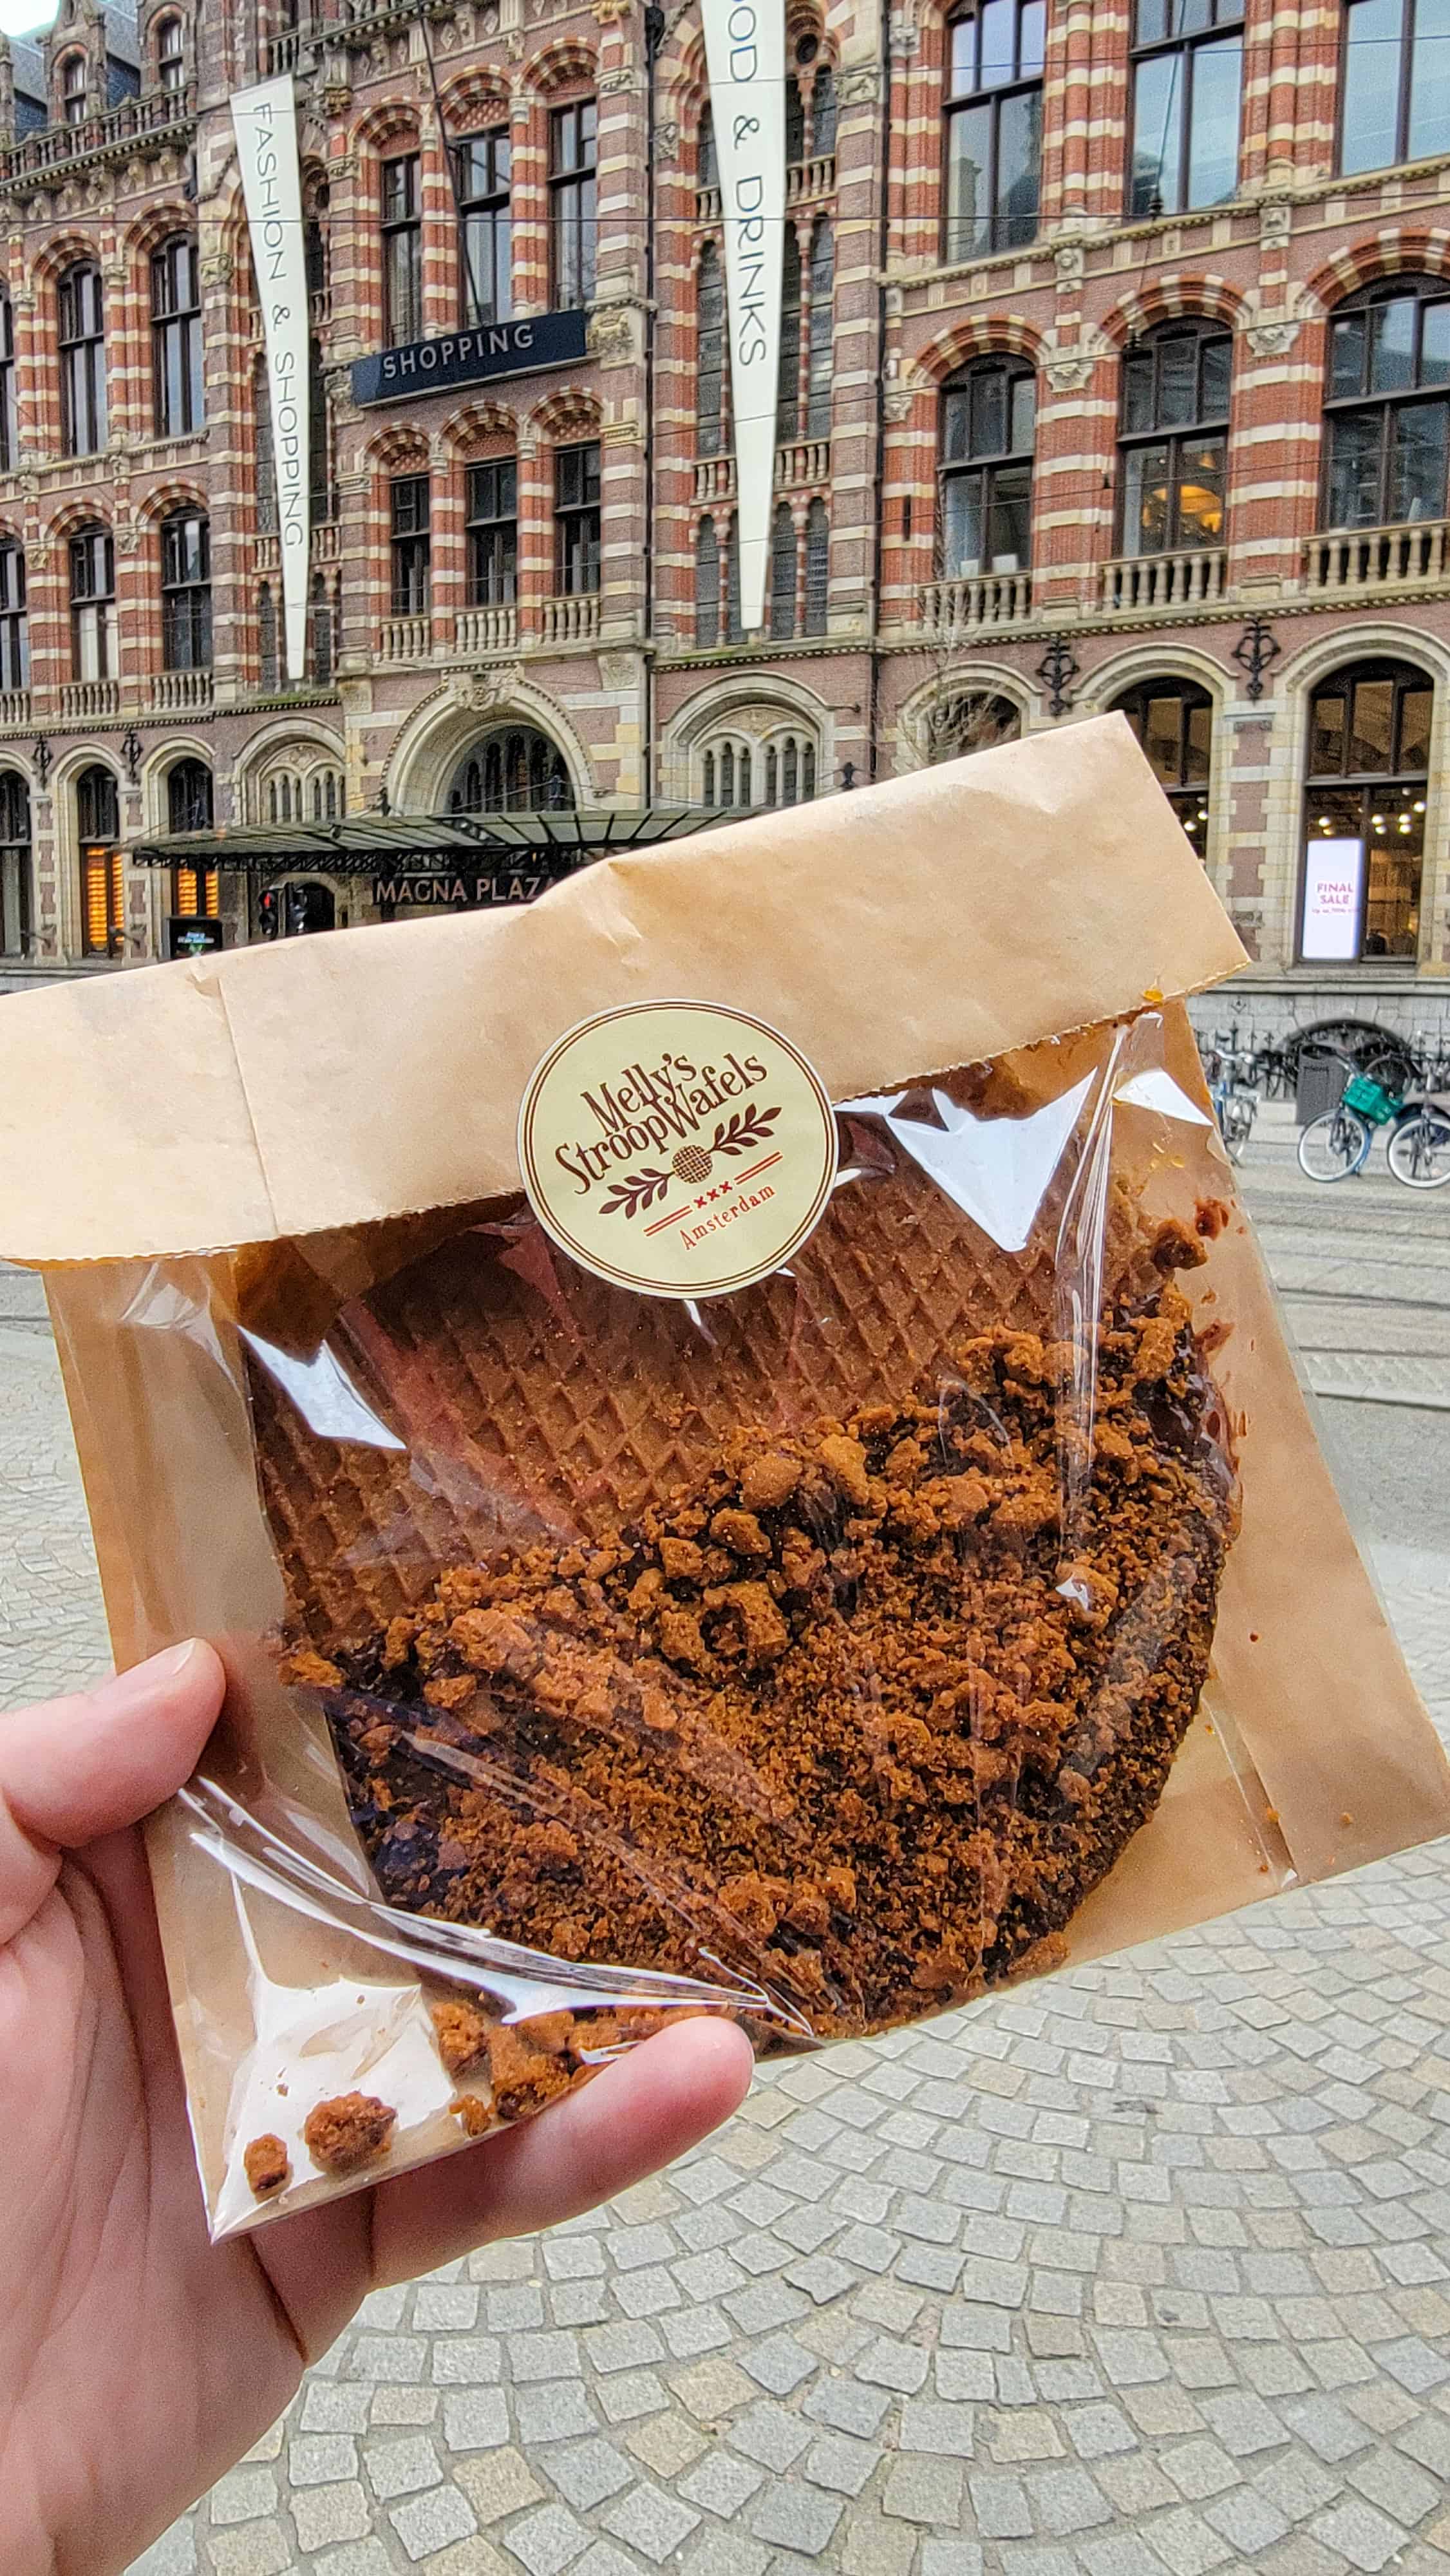 me holding a stroopwafel in amsterdam